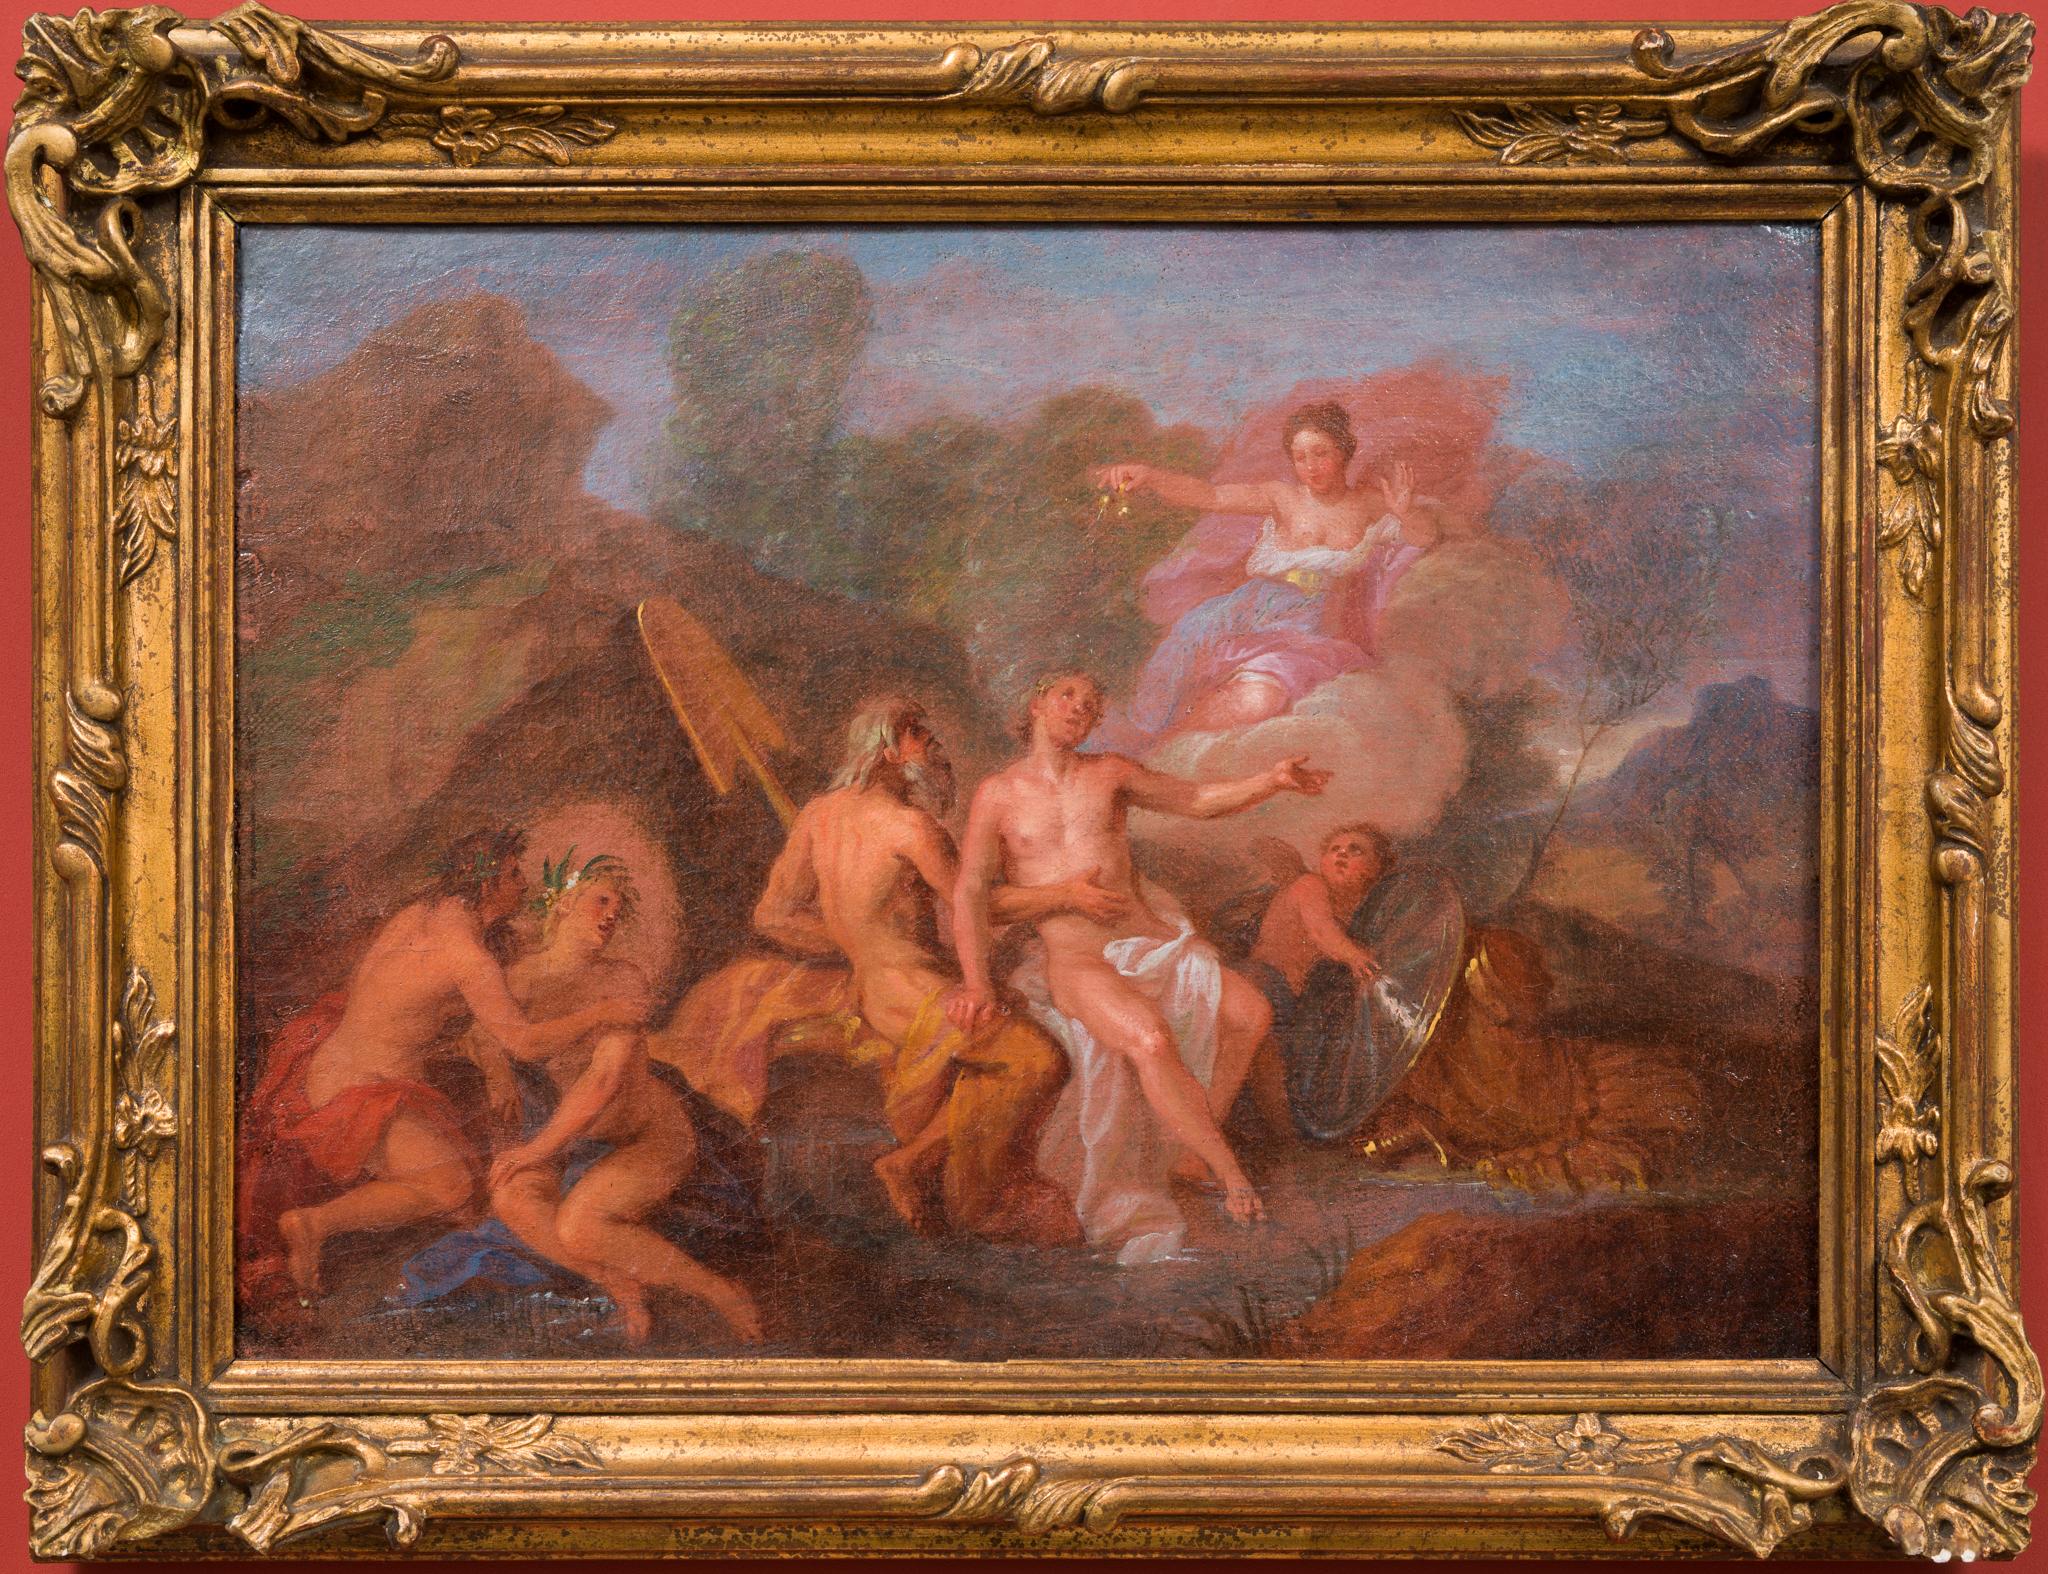 This exquisite painting, attributed to the circle of Charles Antoine Coypel, presents a mythological scene. Though the artist remains unknown, the work clearly echoes the style of the early 18th century, with soft, dreamlike qualities and a